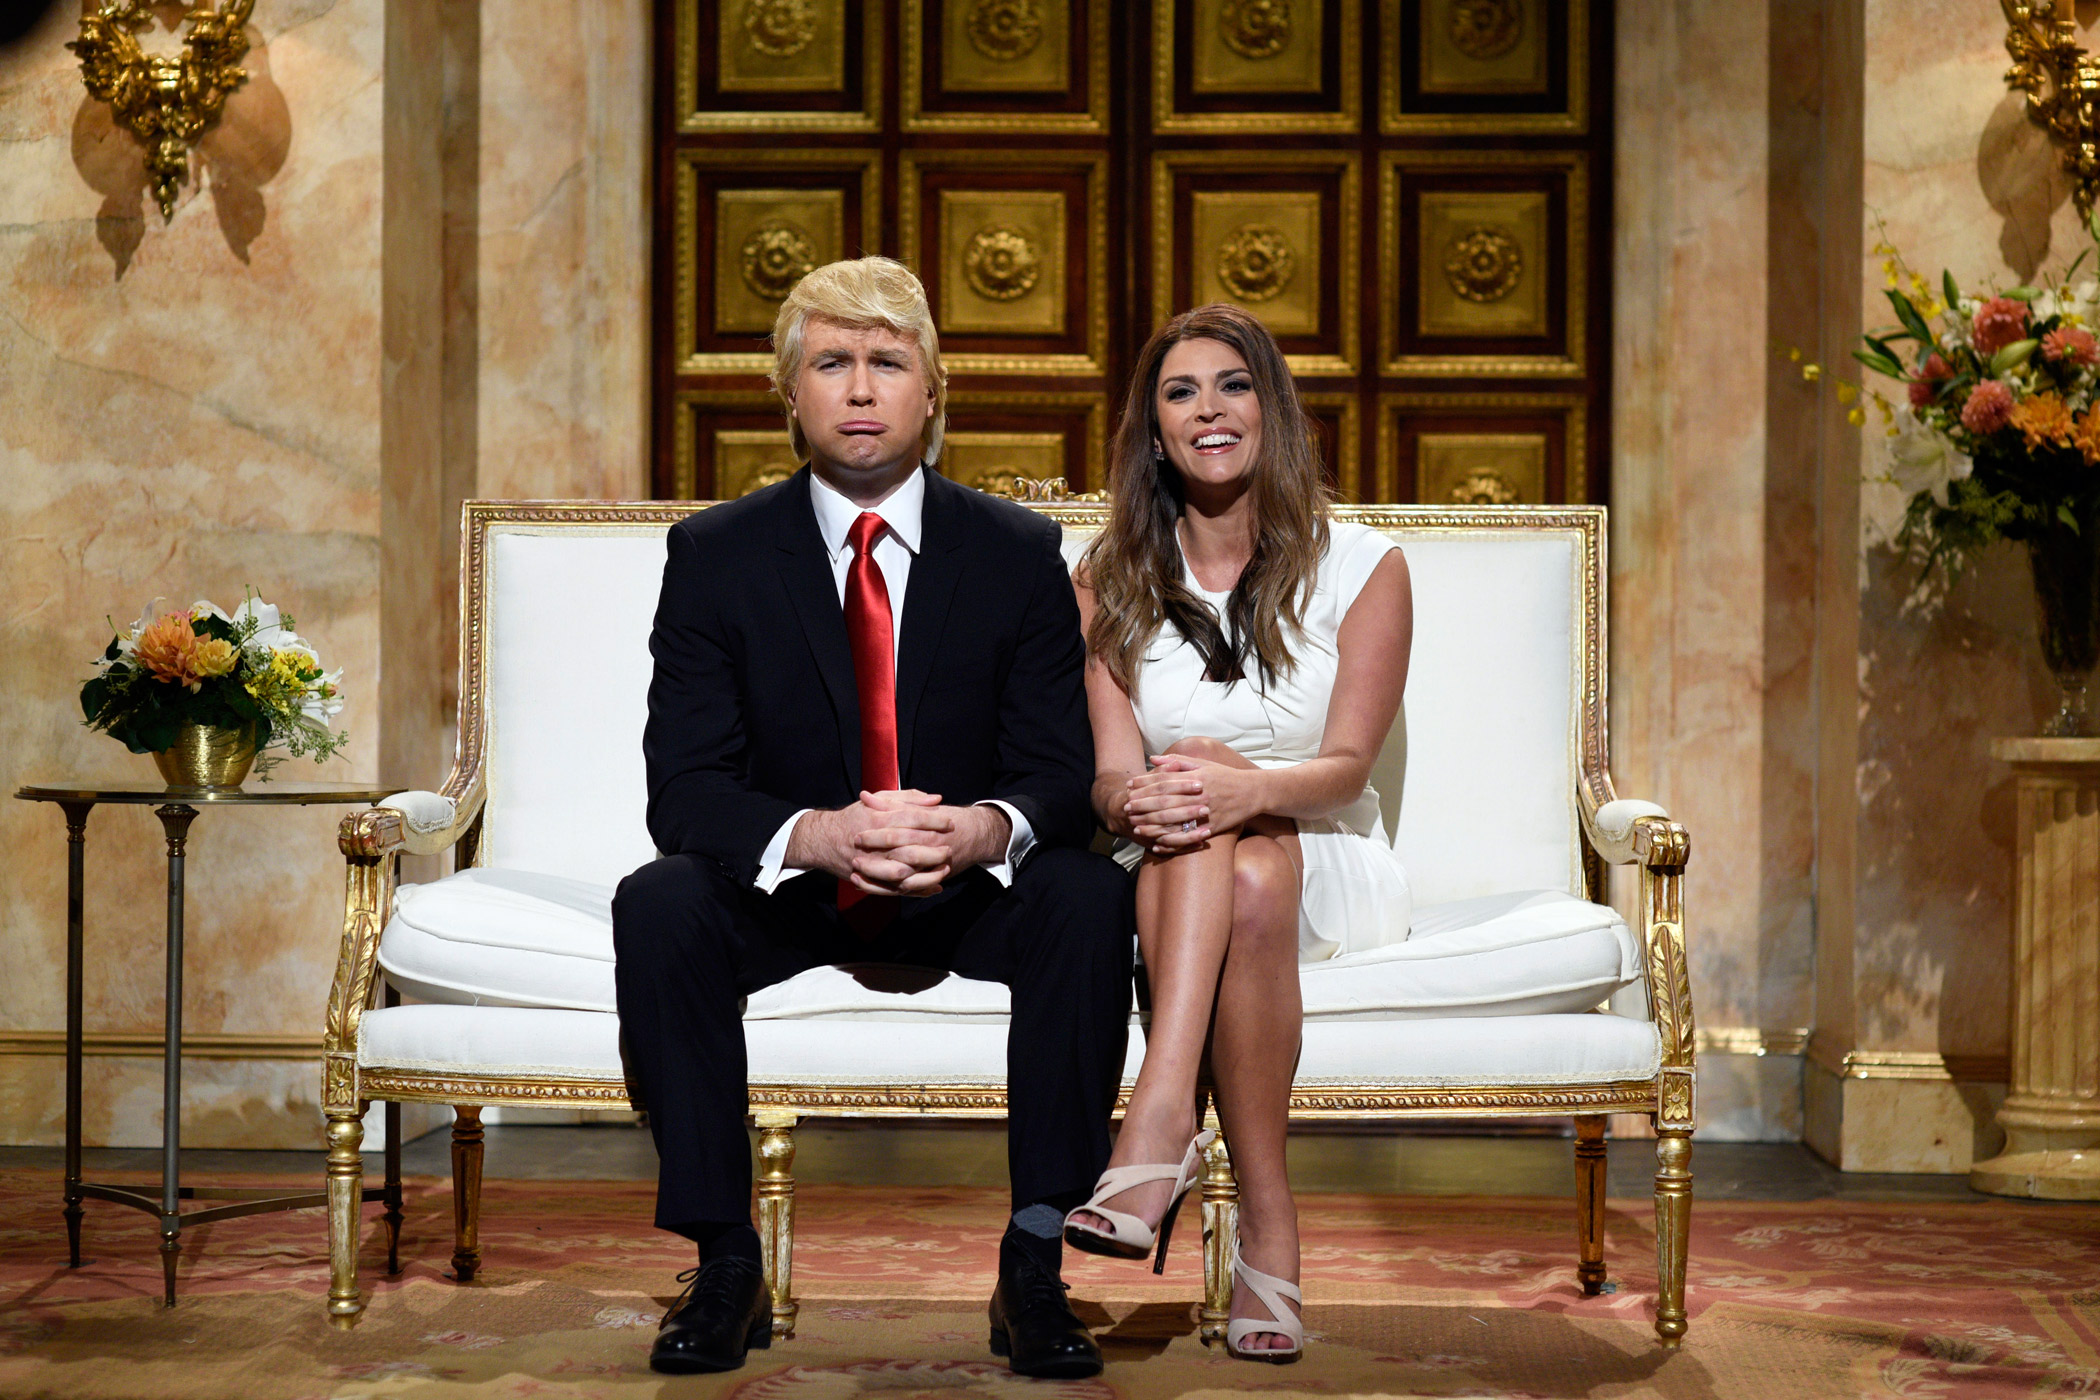 Comedians Taran Killam, as Donald Trump, and Cecily Strong, as Melania Trump, appeared in the sketch 'Trump Cold Open' on Oct. 3, 2015.